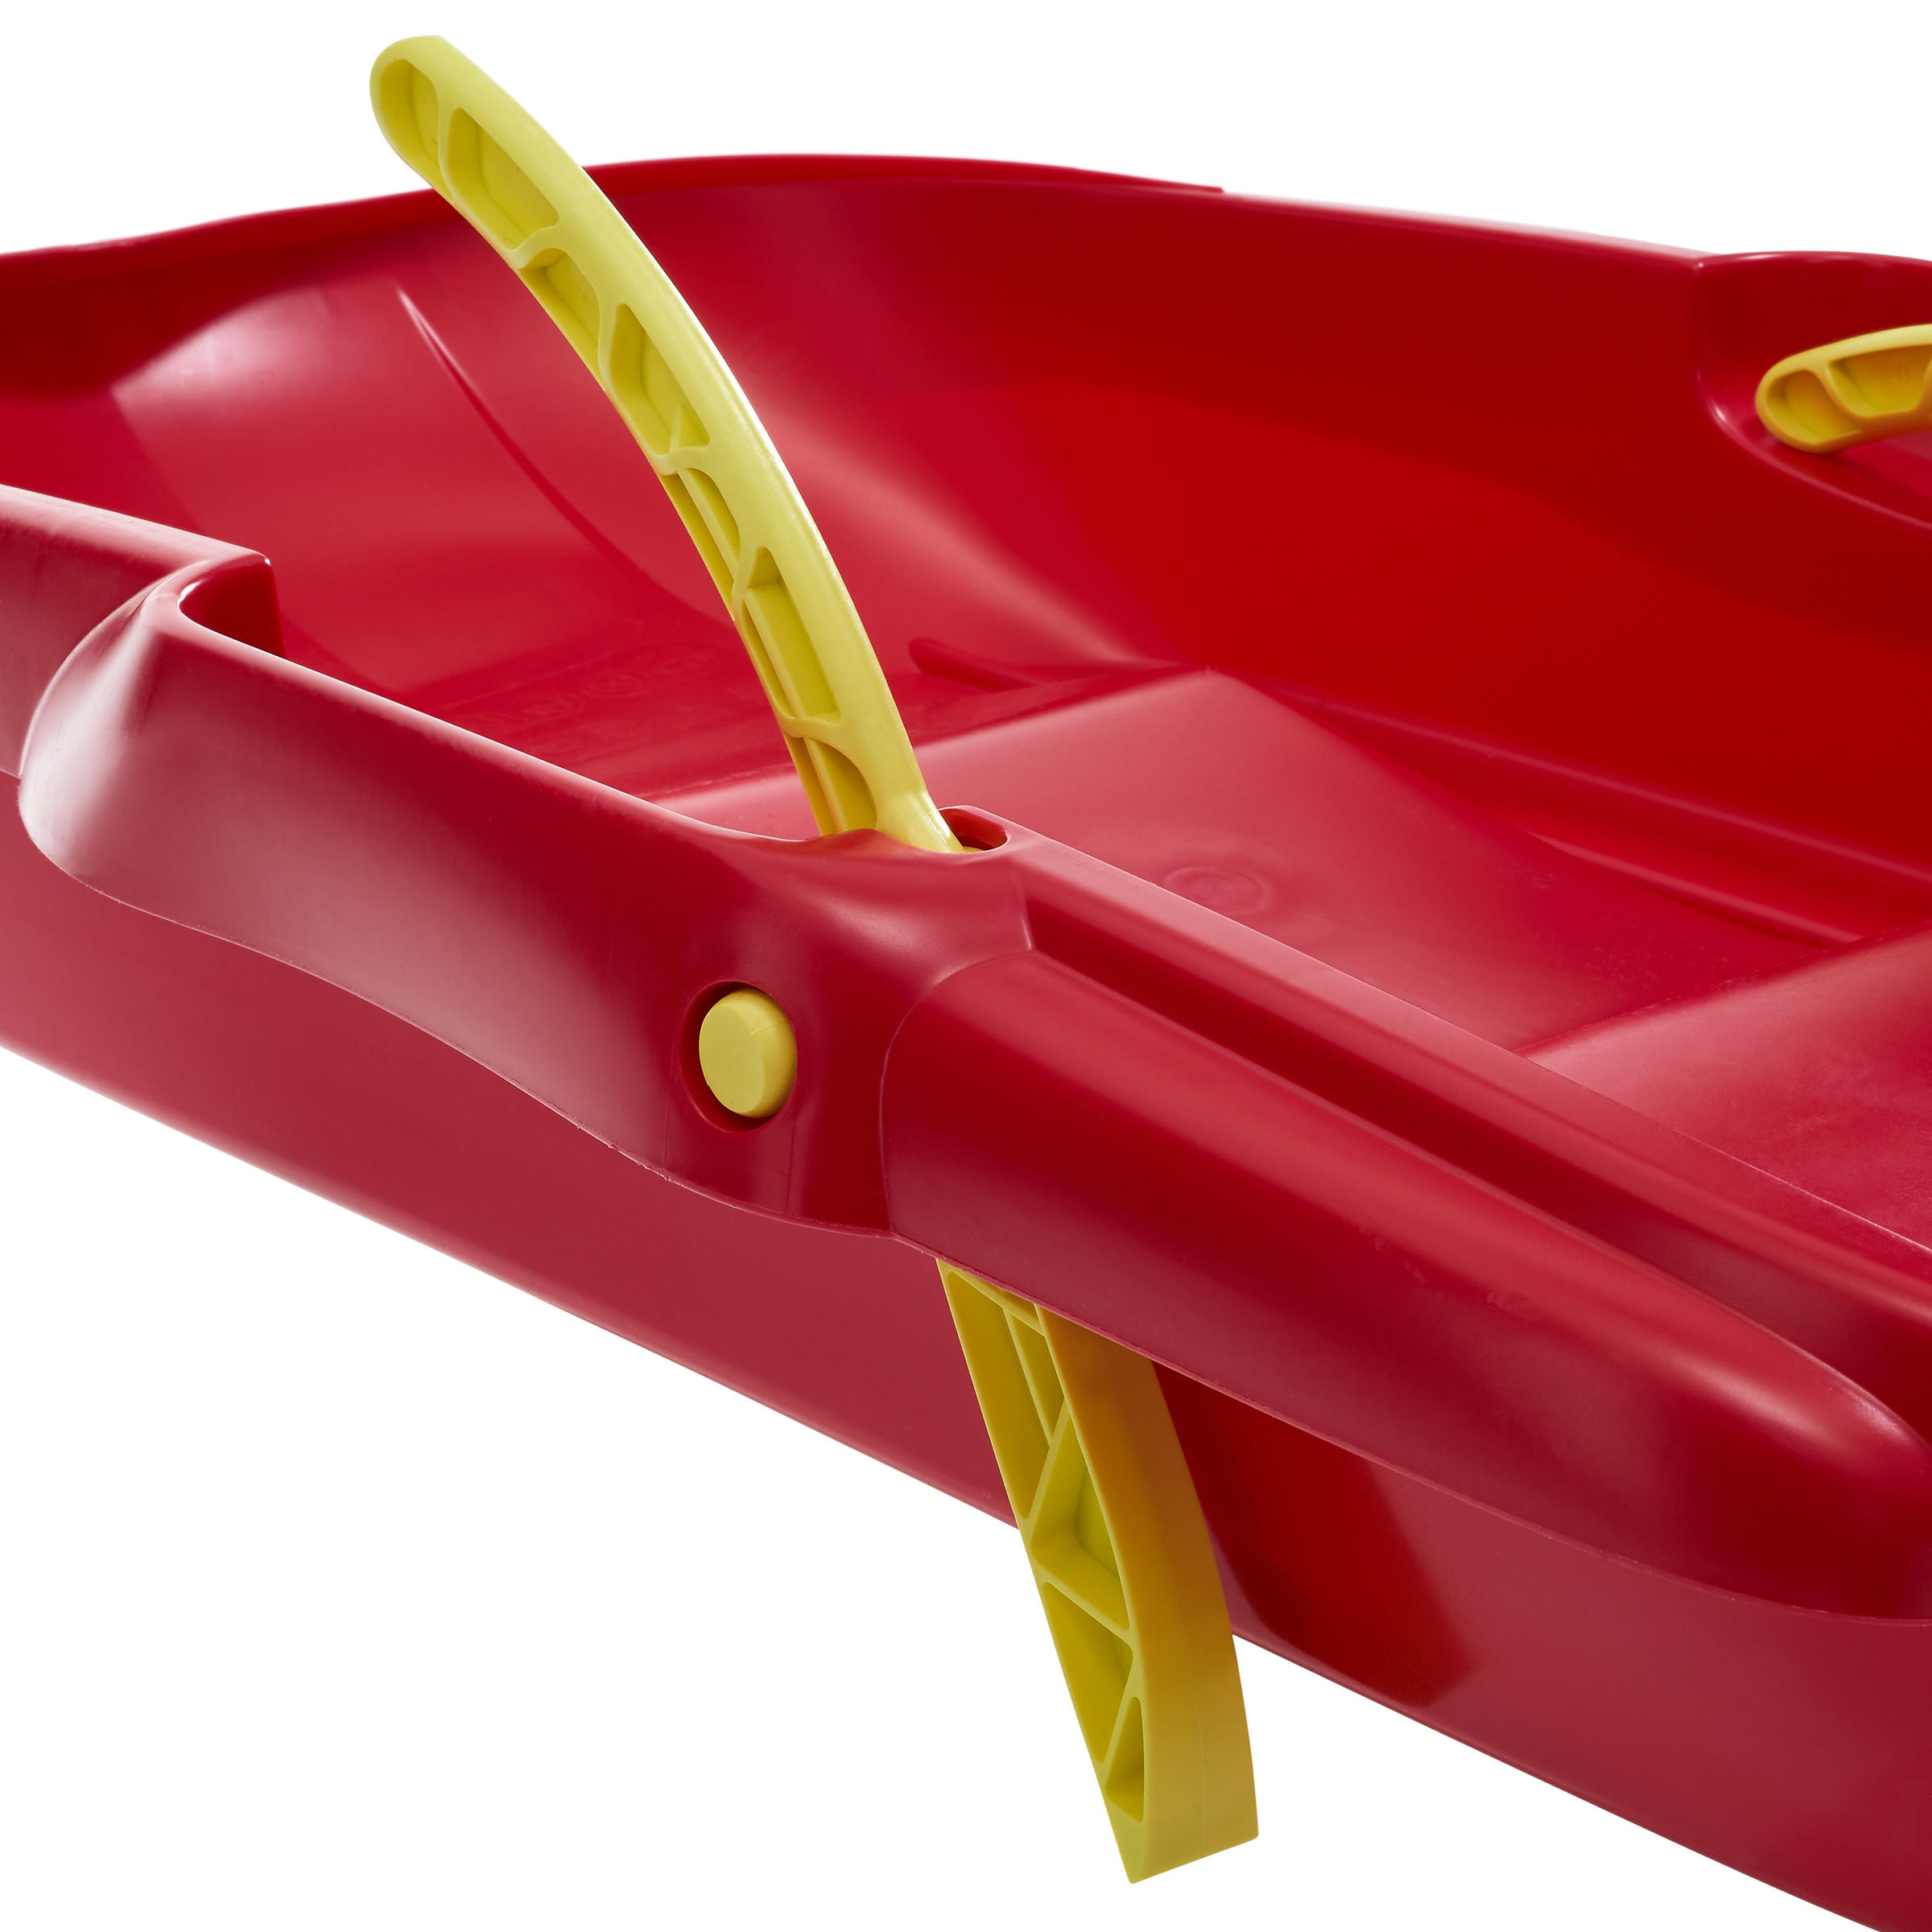 MRZ 100 2-Person Sledge With Brake - Red 5/8